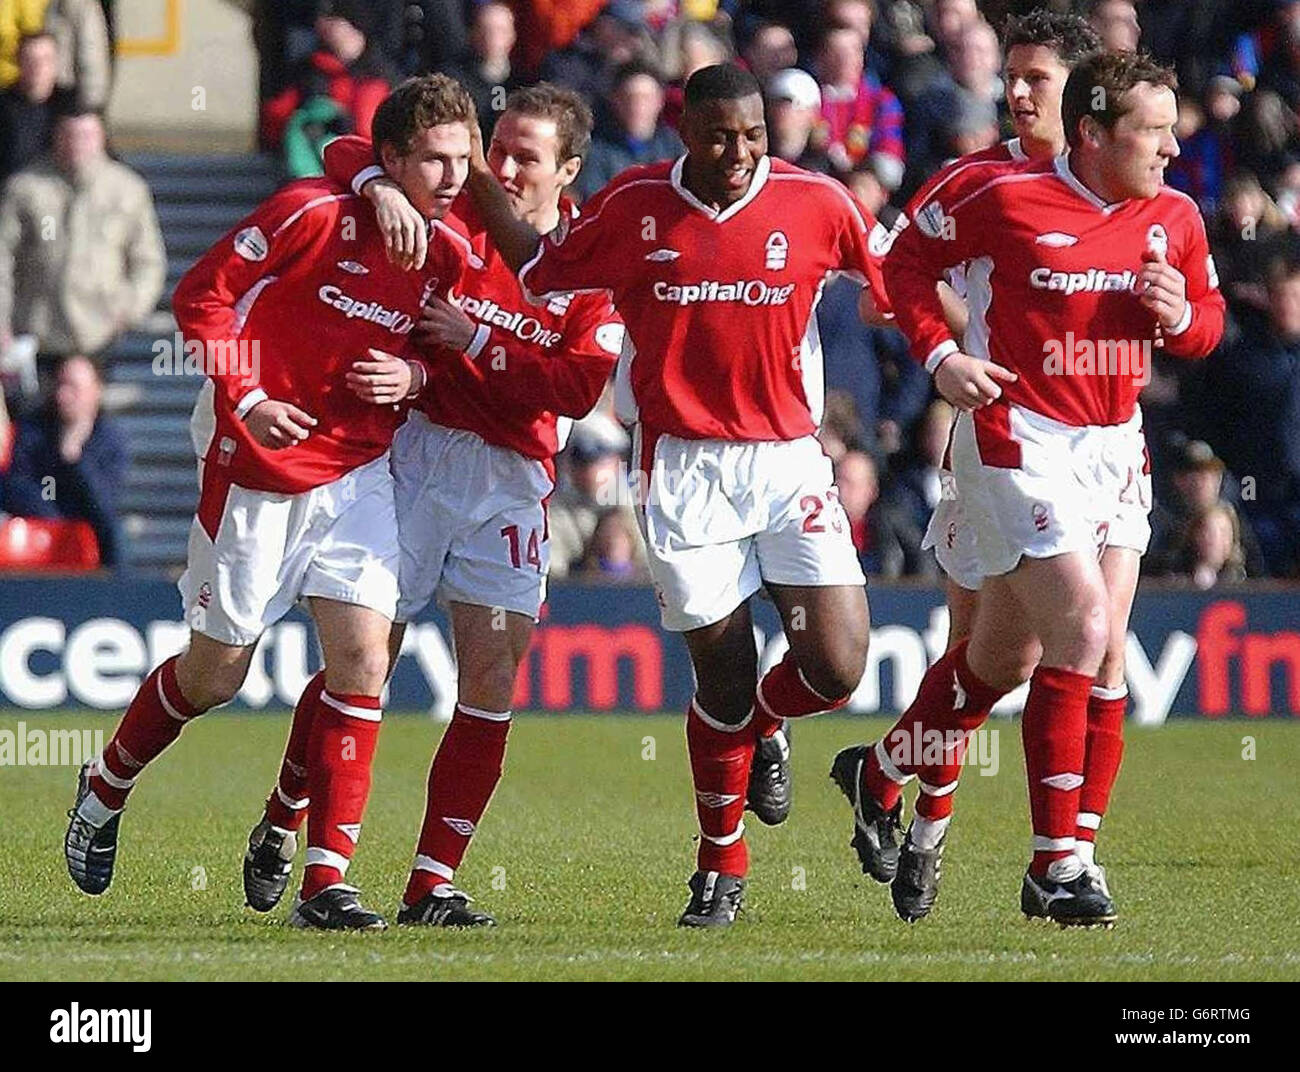 Nottingham Forest Gareth Williams is mobbed by team mates after he scored against Crysrtal Palace during the Nationwide Division One match at the City Ground, Nottingham. NO UNOFFICIAL CLUB WEBSITE USE. Stock Photo